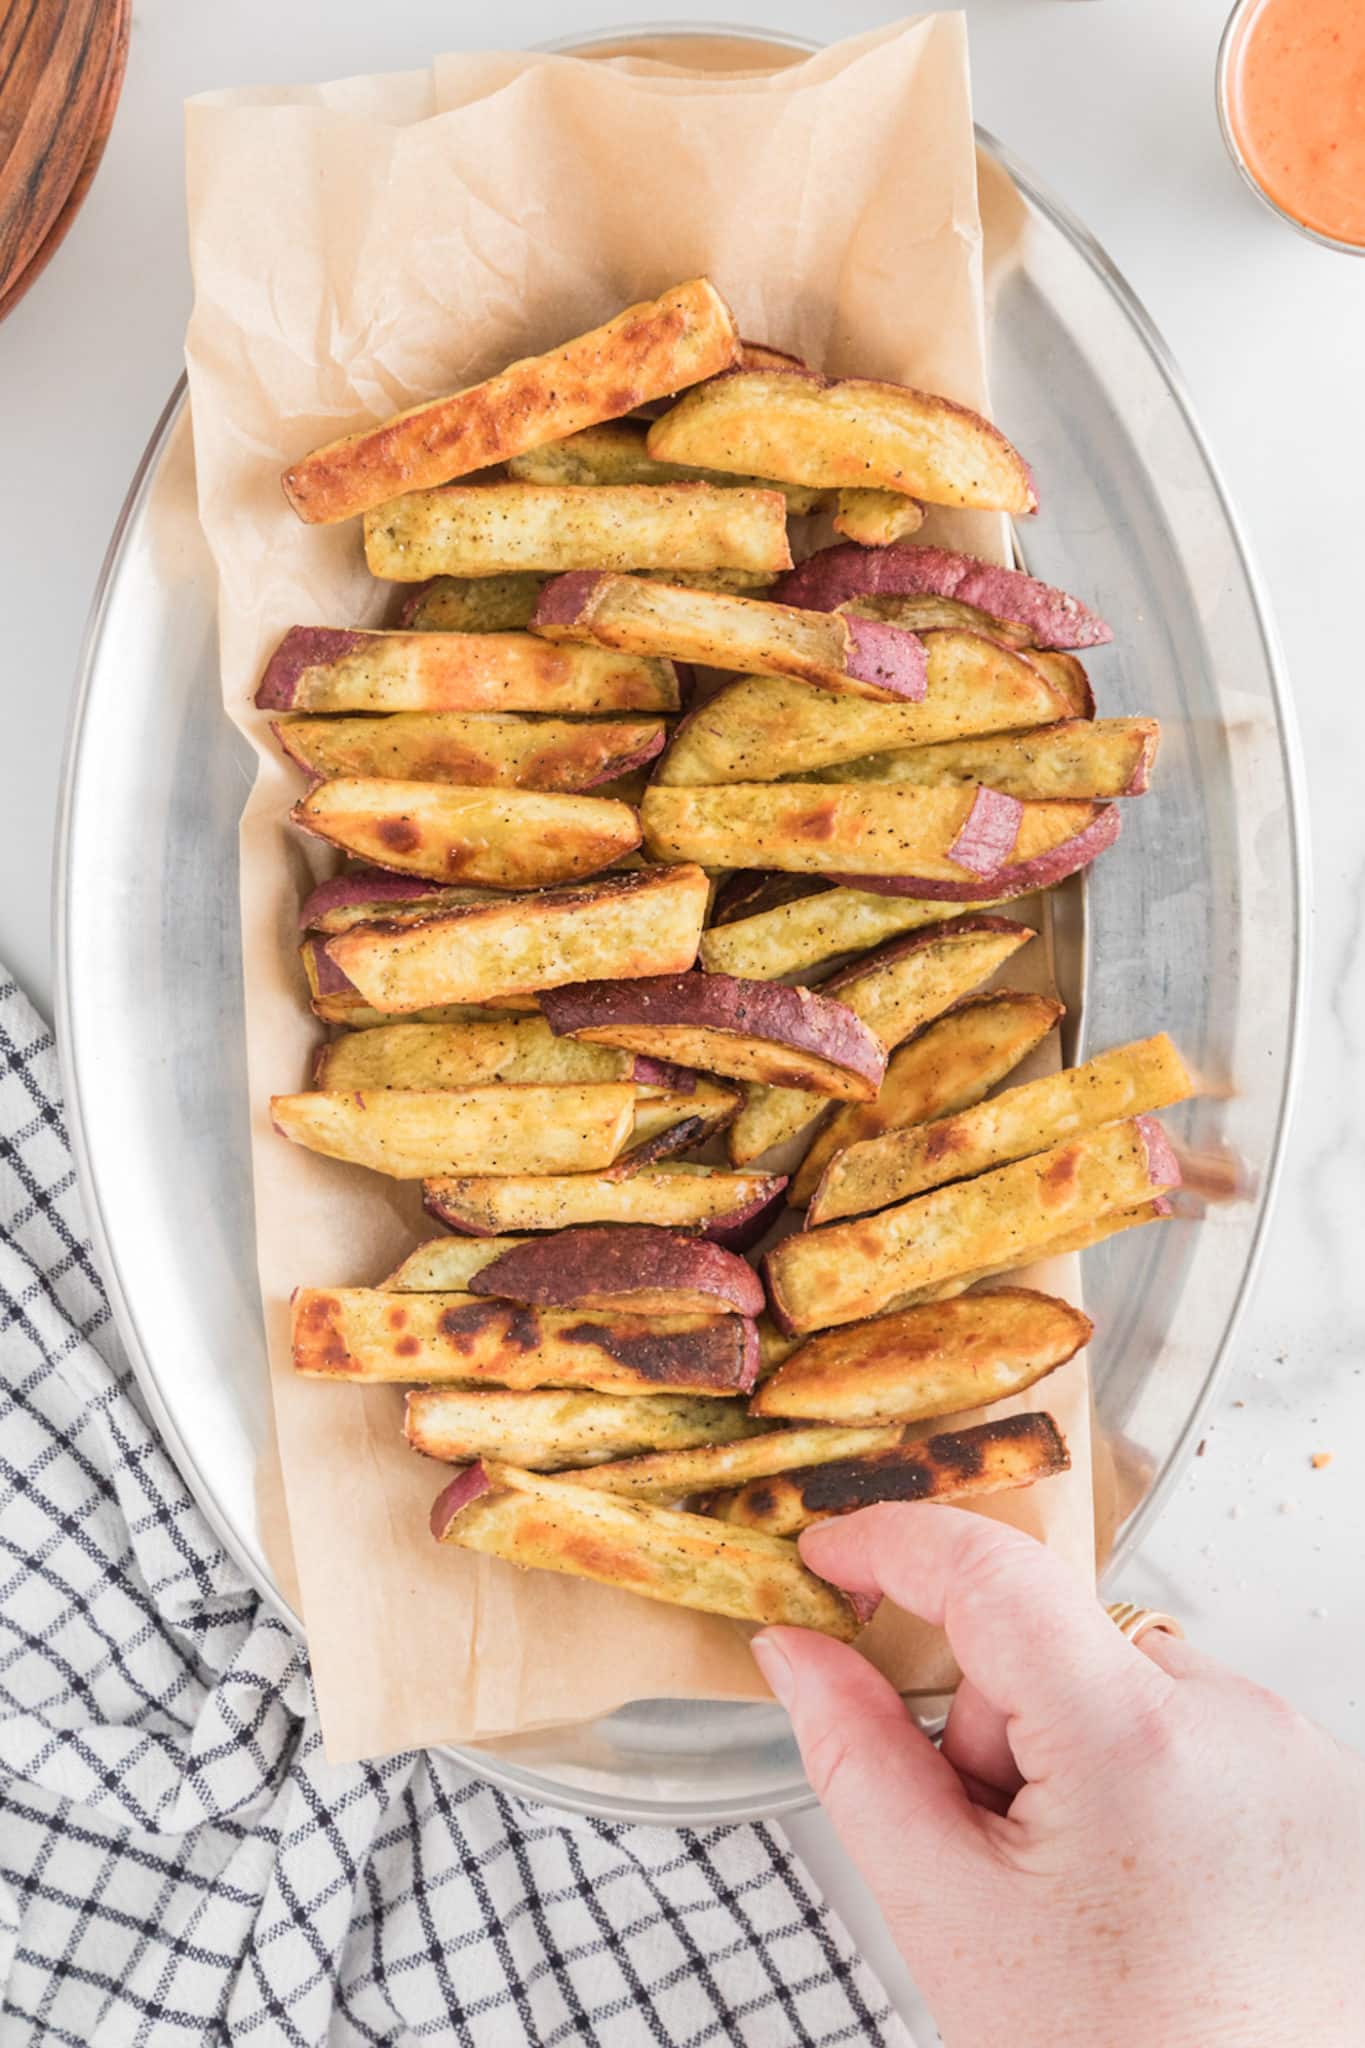 Sweet potato fries on parchment paper in a silver tray.